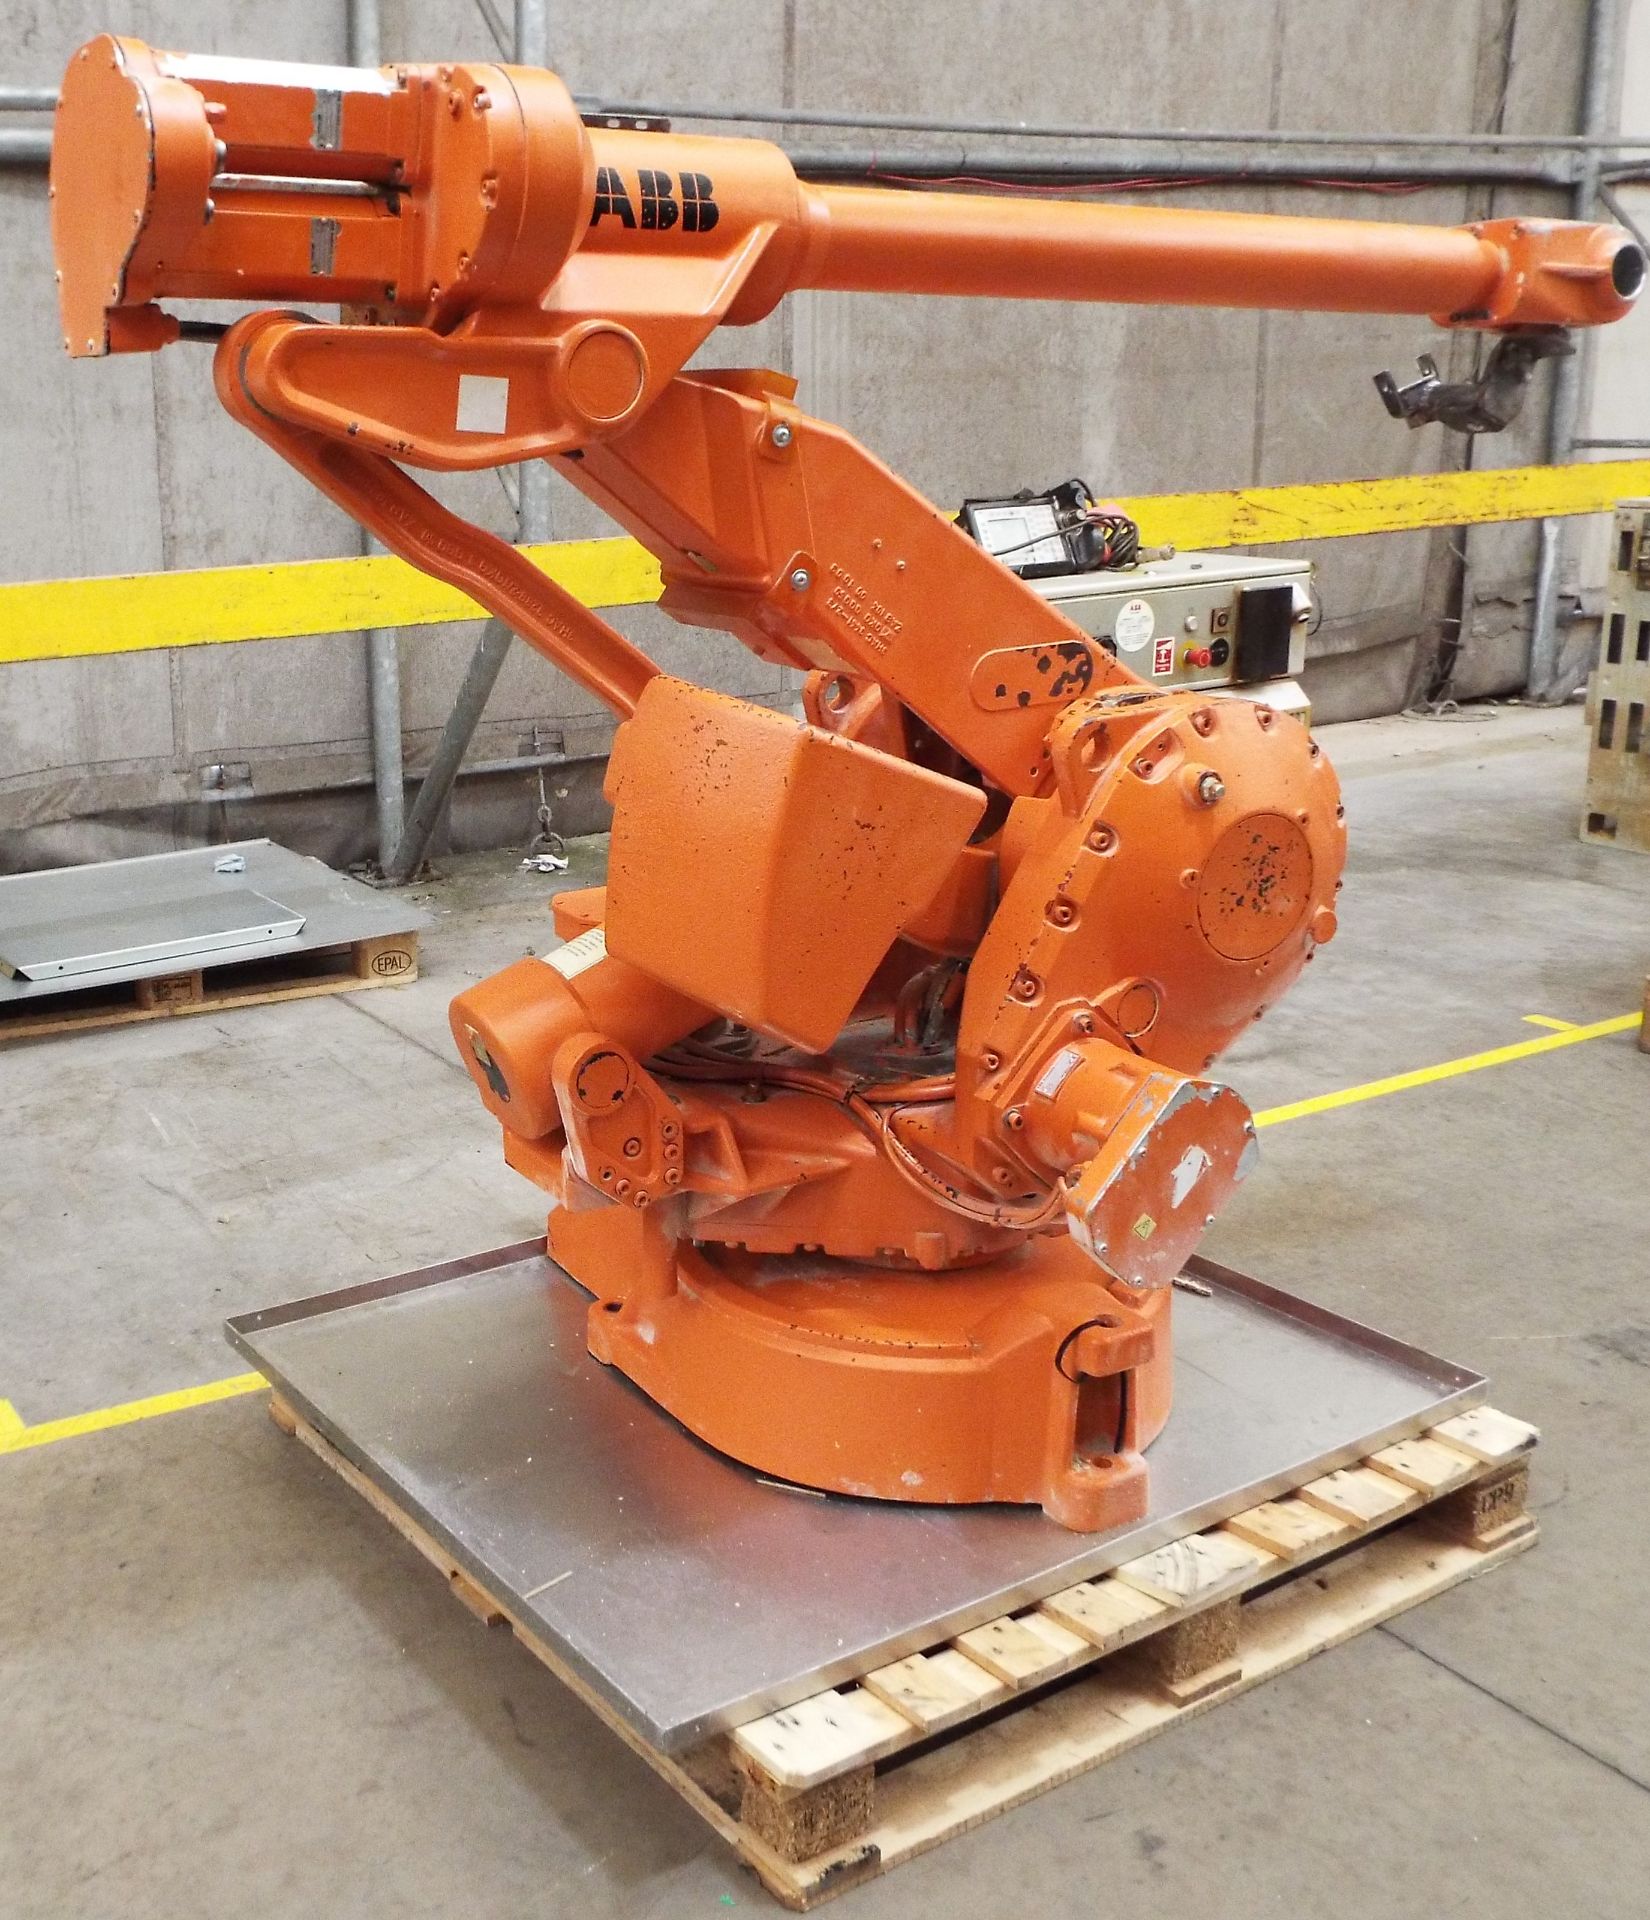 ABB-IRB-4400-M2000 6 Axis Industrial Robot